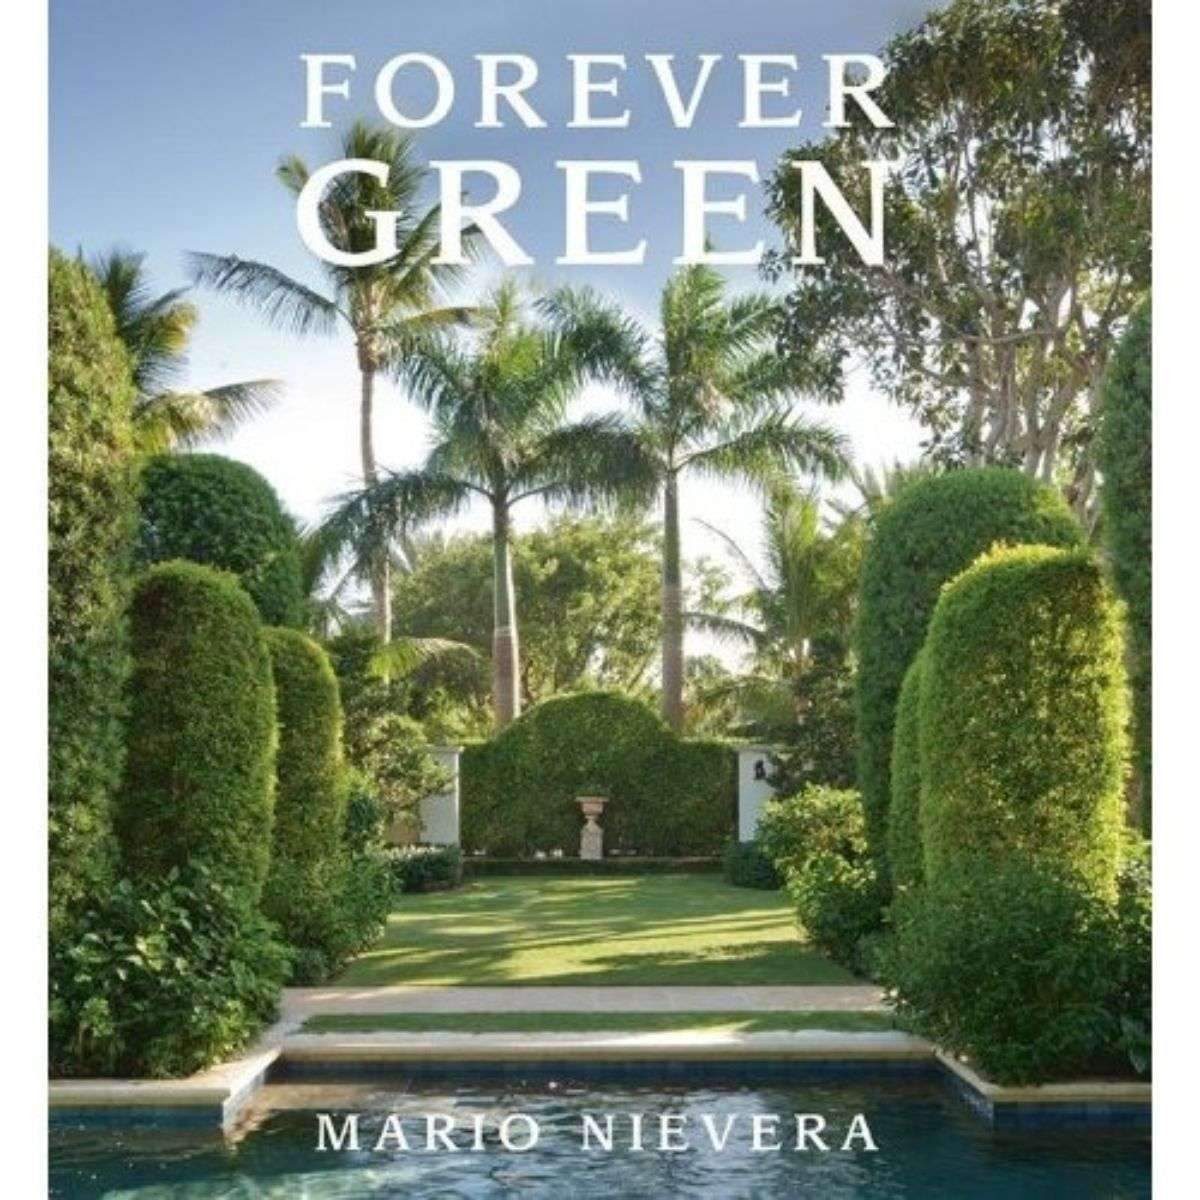 Forever Green: A Landscape Architect’s Innovative Gardens Offer Environments to Love and Delight